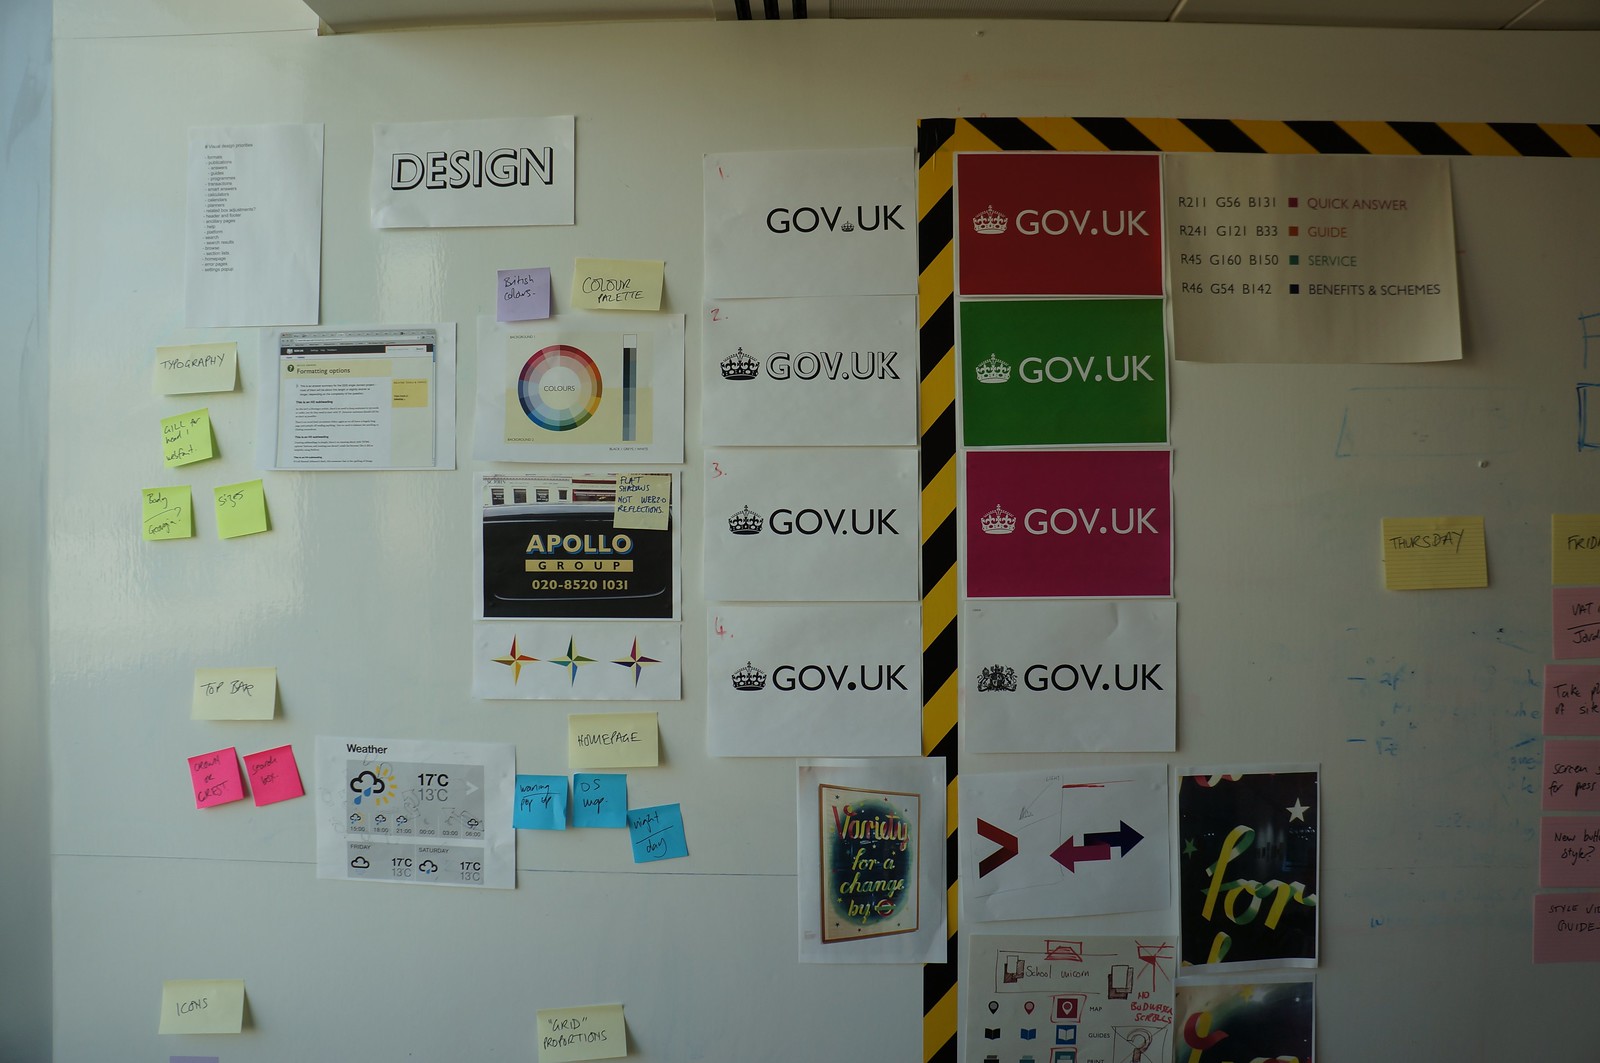 Photo: Early design concepts for GOV.UK before launch